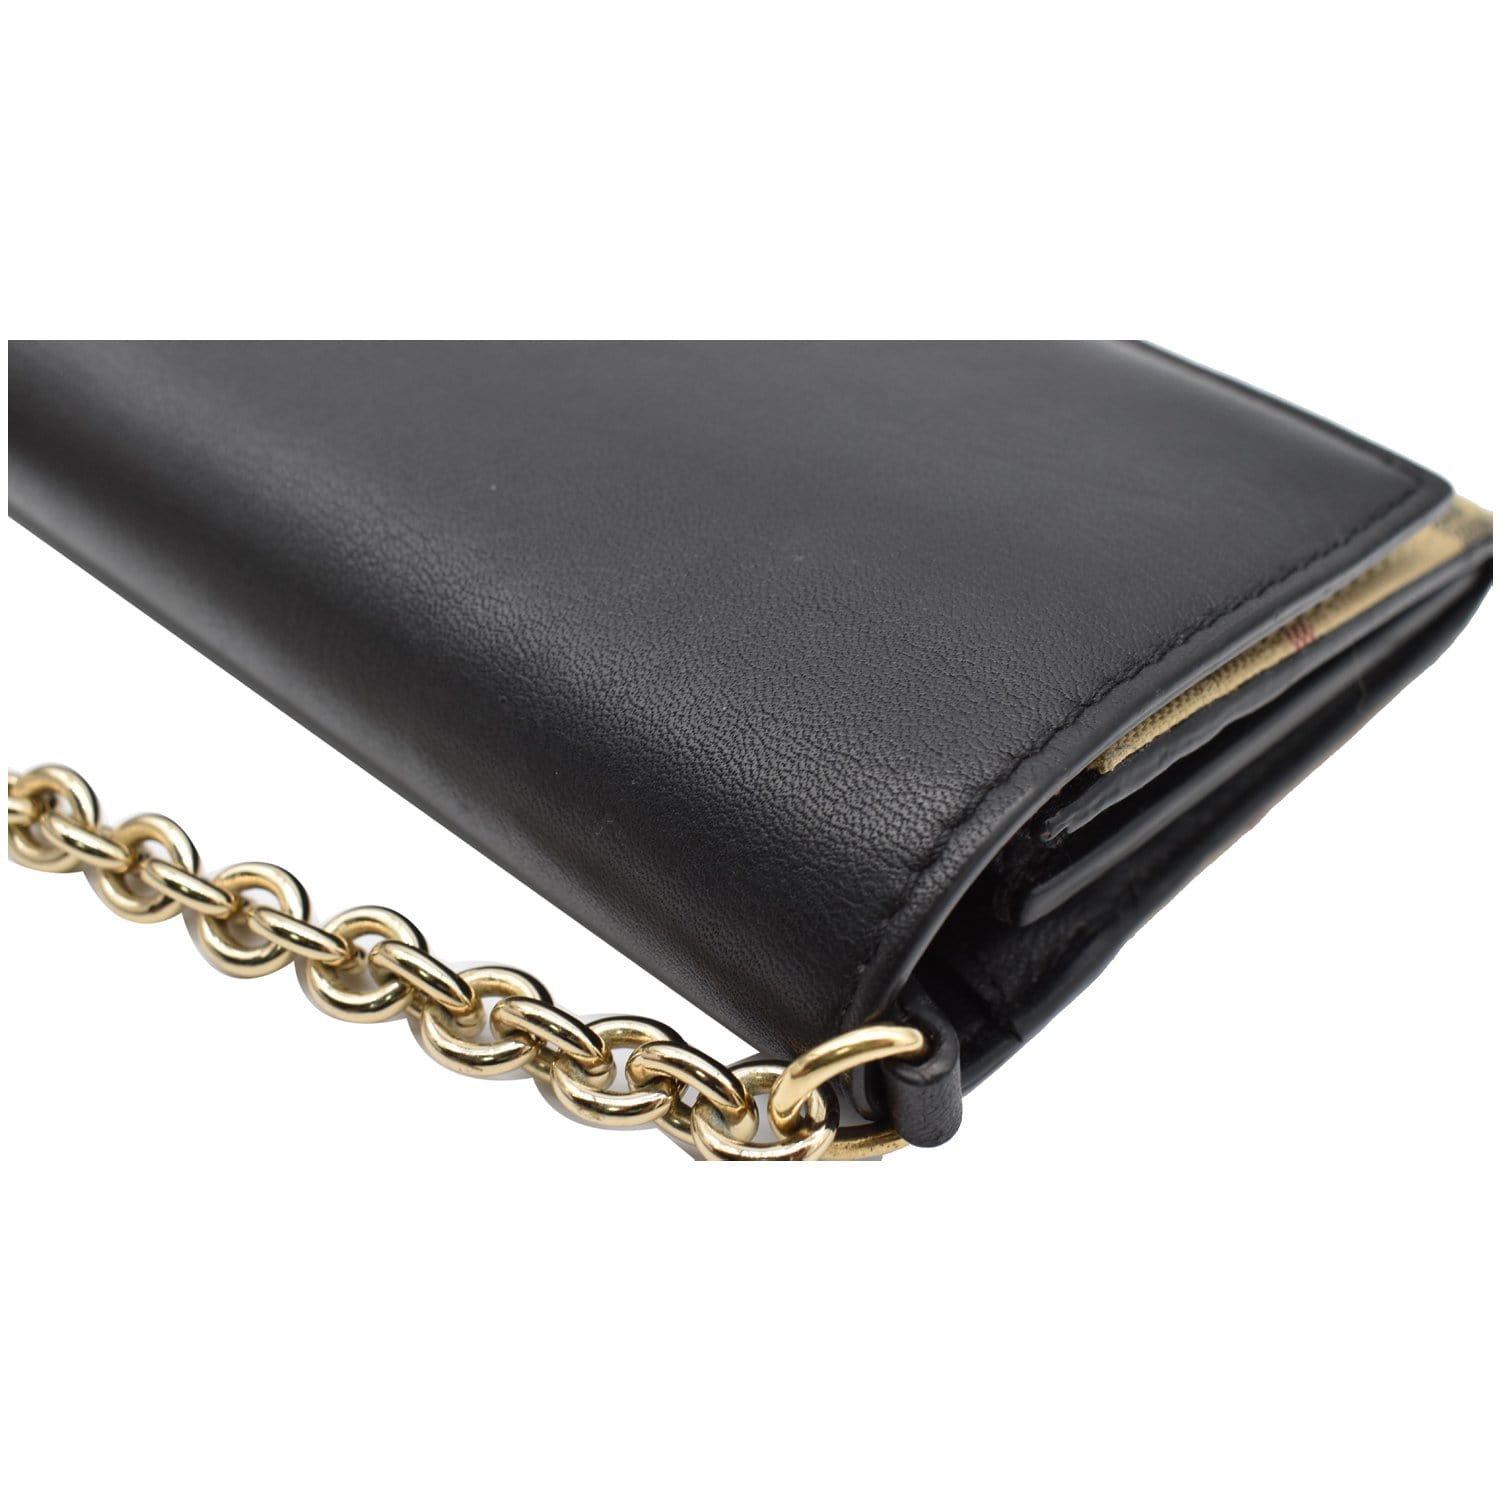 Burberry chain-detail Leather Wallet - Black